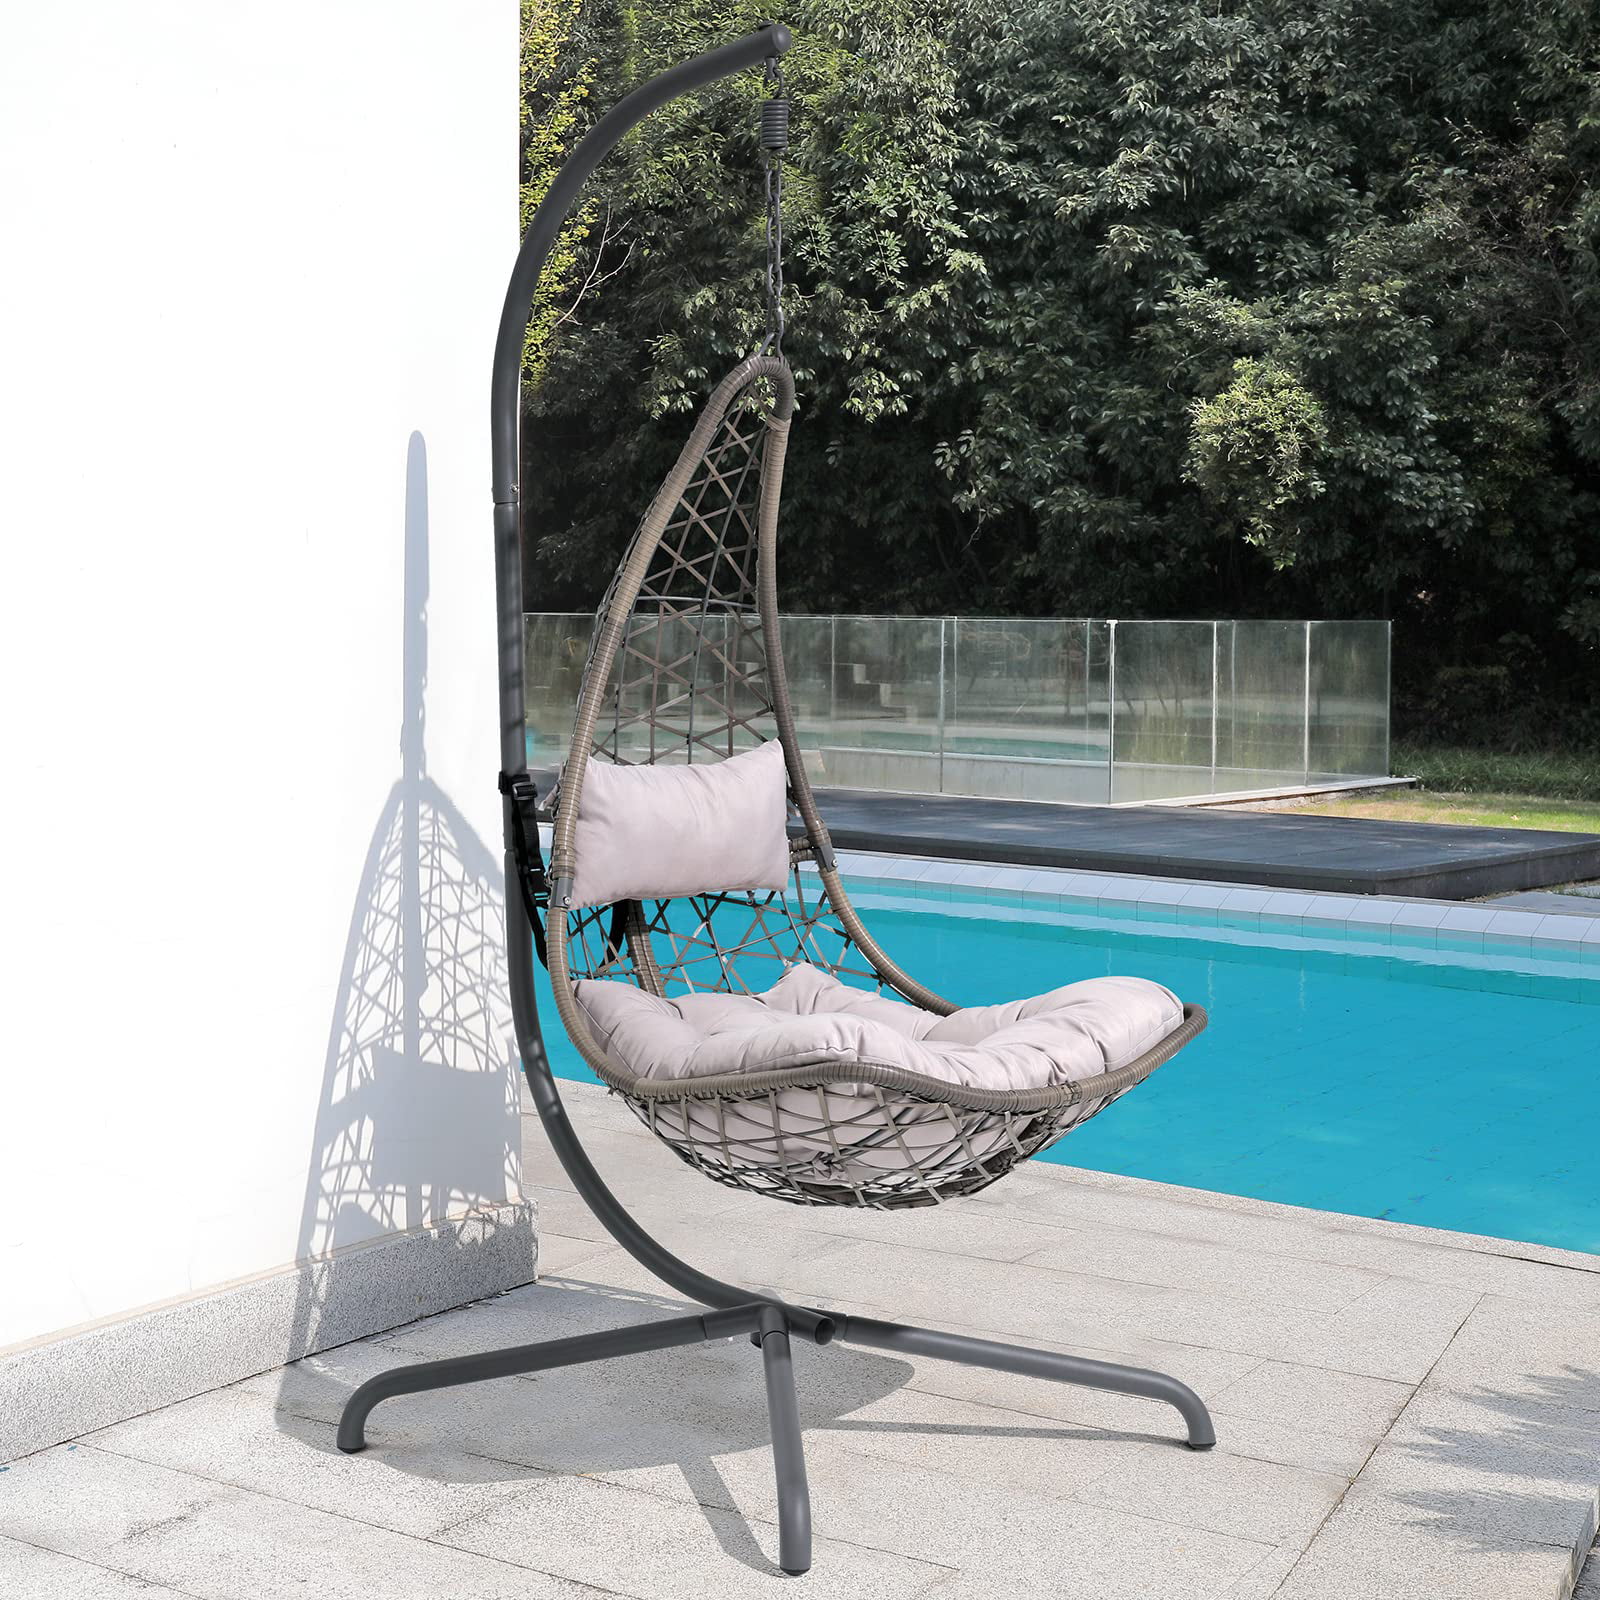 JOIVI Patio Swing Egg Chair with Stand, Oversized Cocoon-Shaped Hammock  Chair, Beige Wicker/ White Cushion